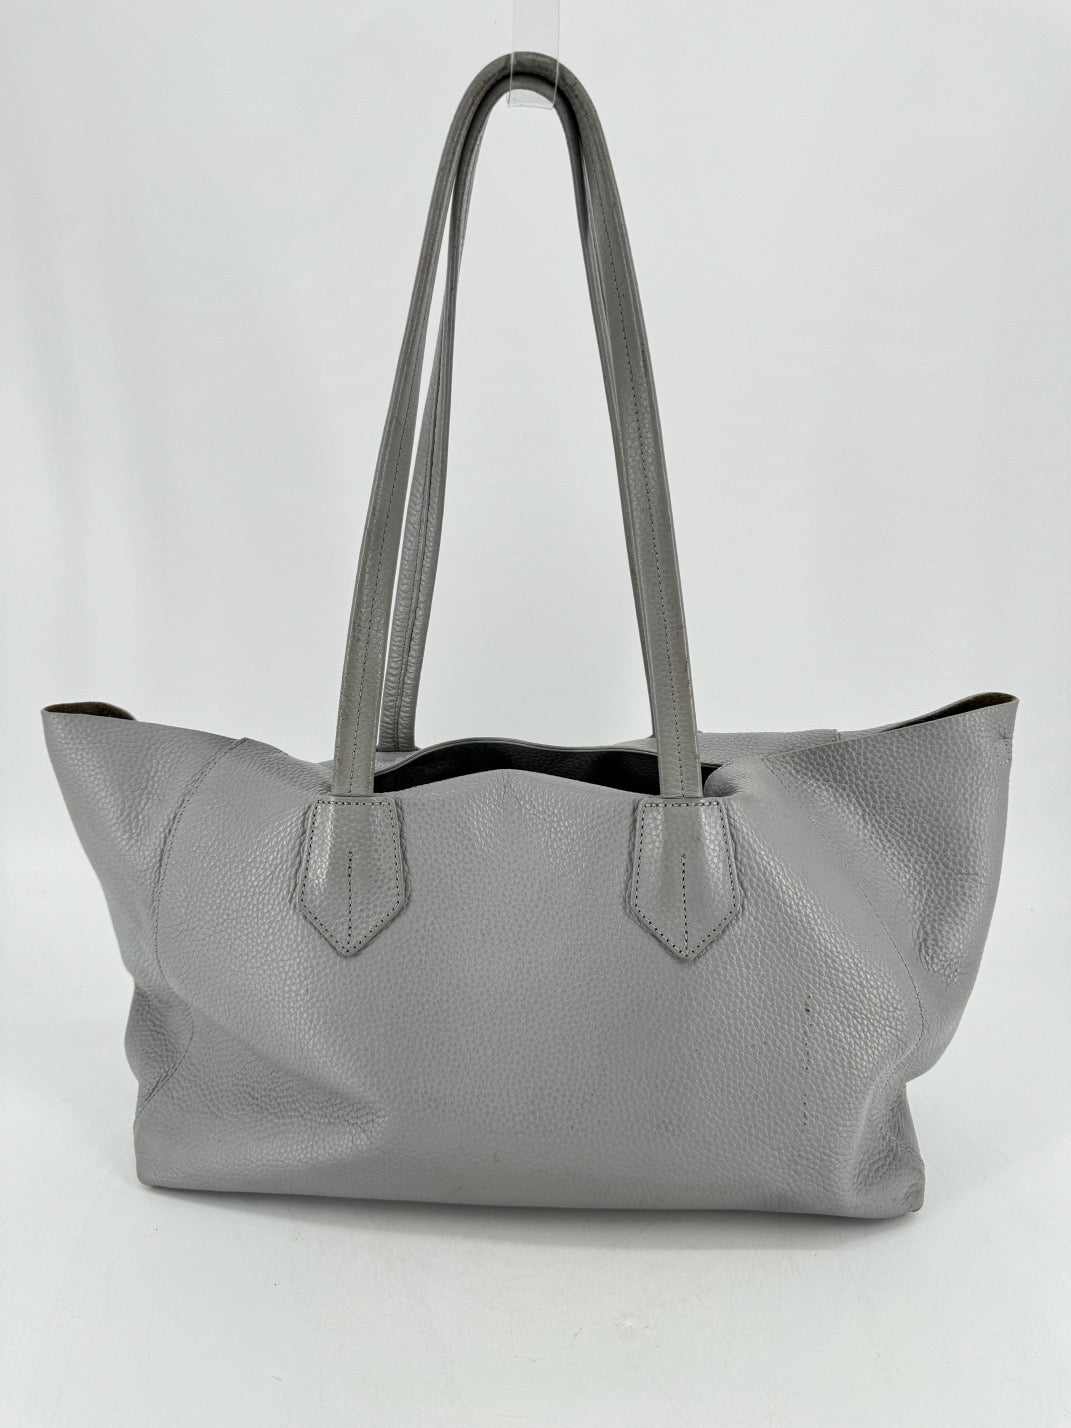 NEELY & CHLOE Ice Blue Leather Tote